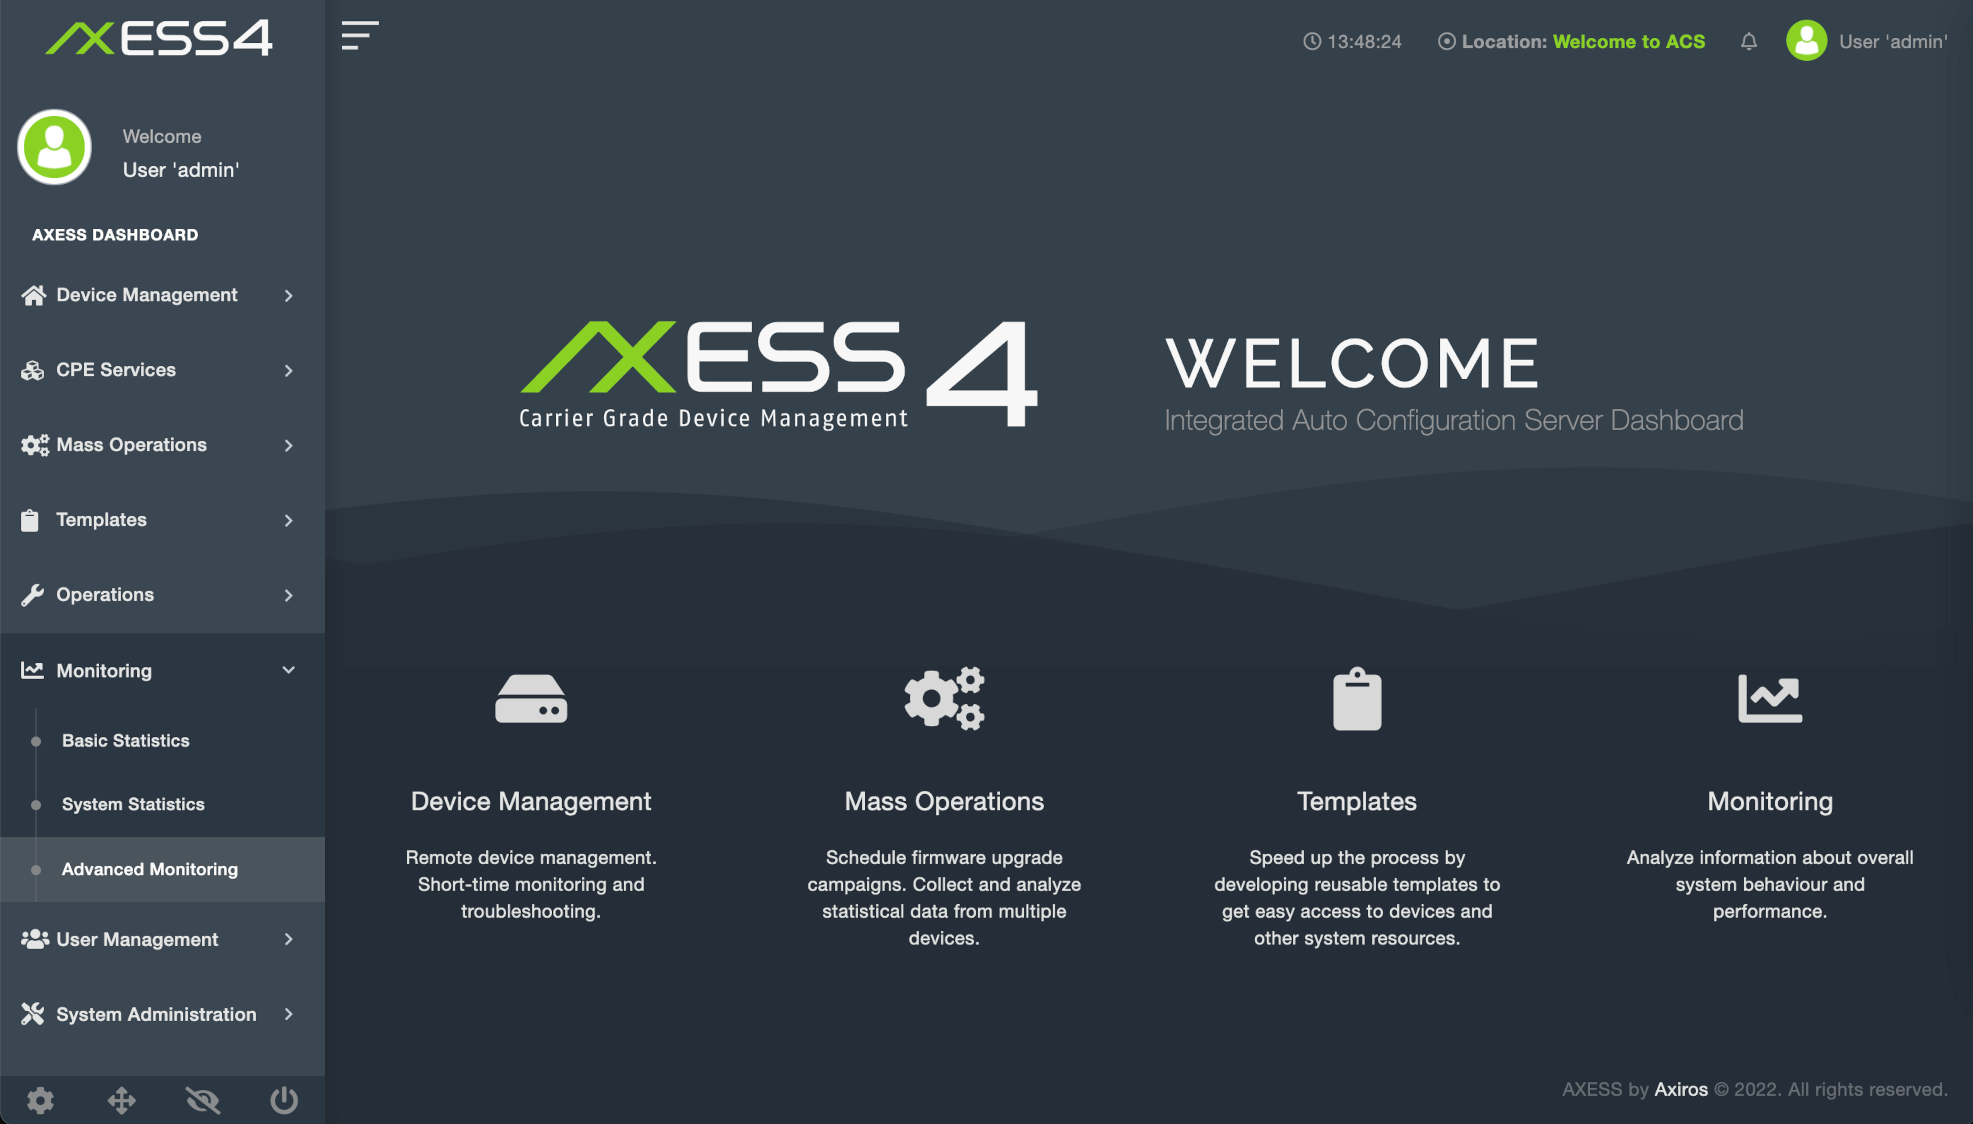 AXESS4_Integrated-ACS-Dashboard.png